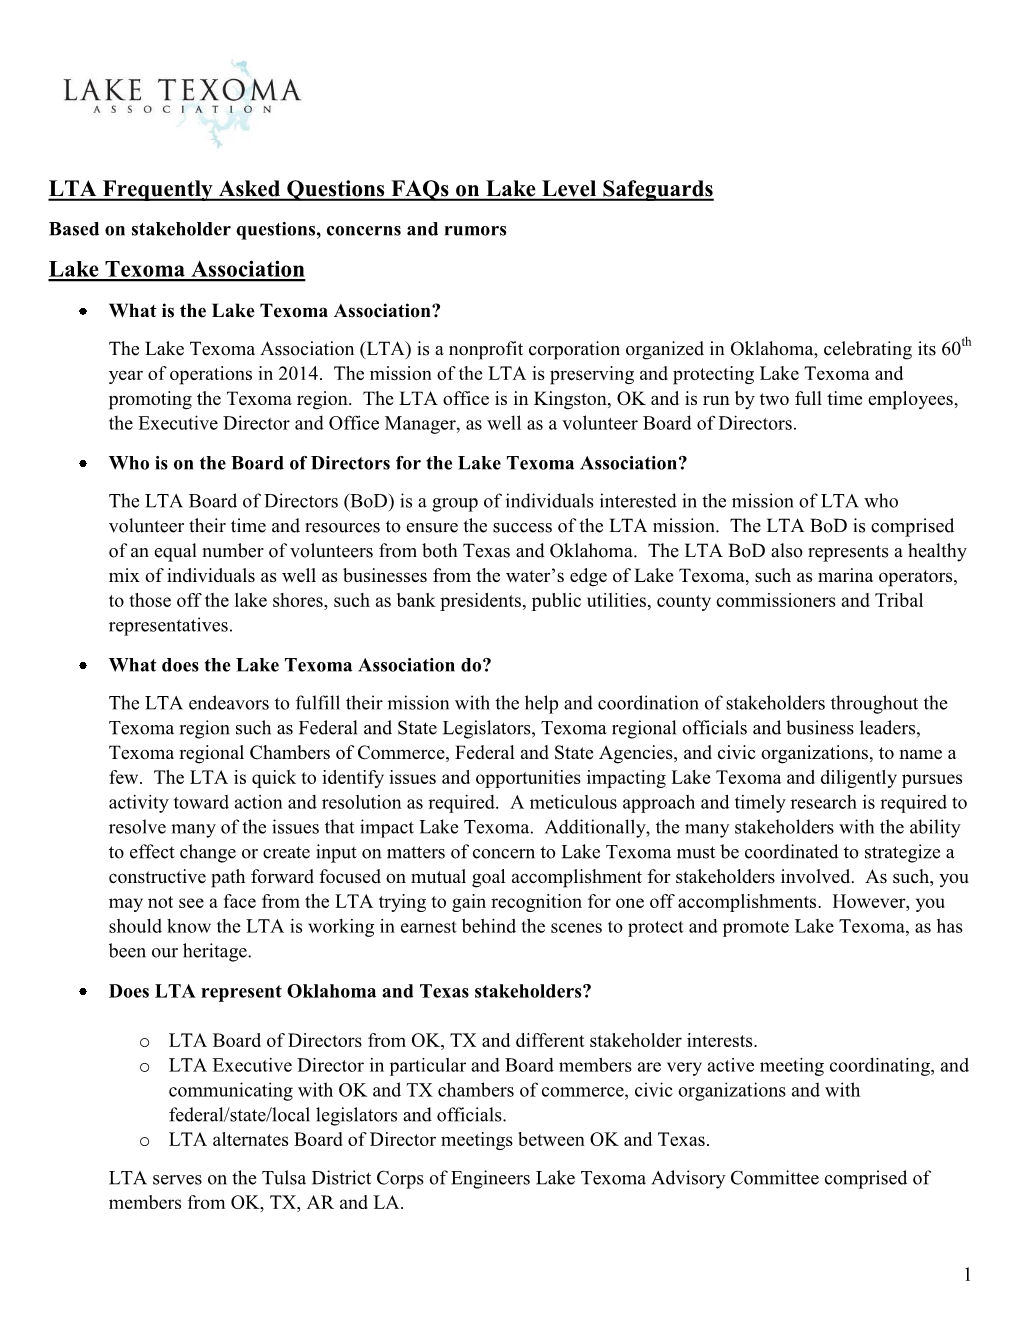 LTA Frequently Asked Questions Faqs on Lake Level Safeguards